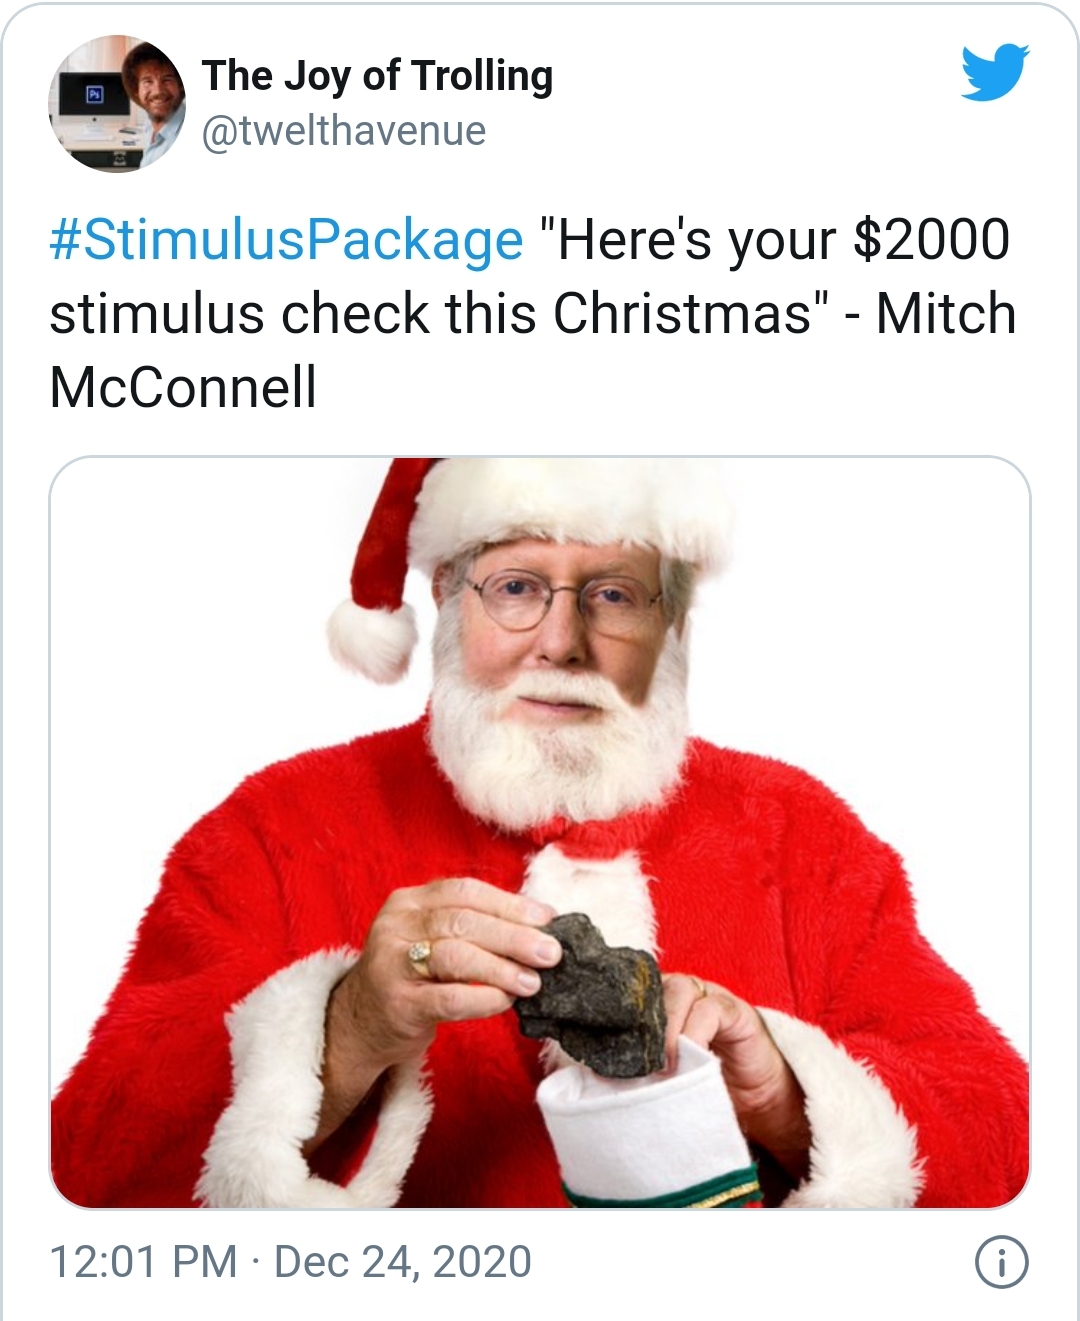 santa claus - The Joy of Trolling "Here's your $2000 stimulus check this Christmas" Mitch McConnell 0